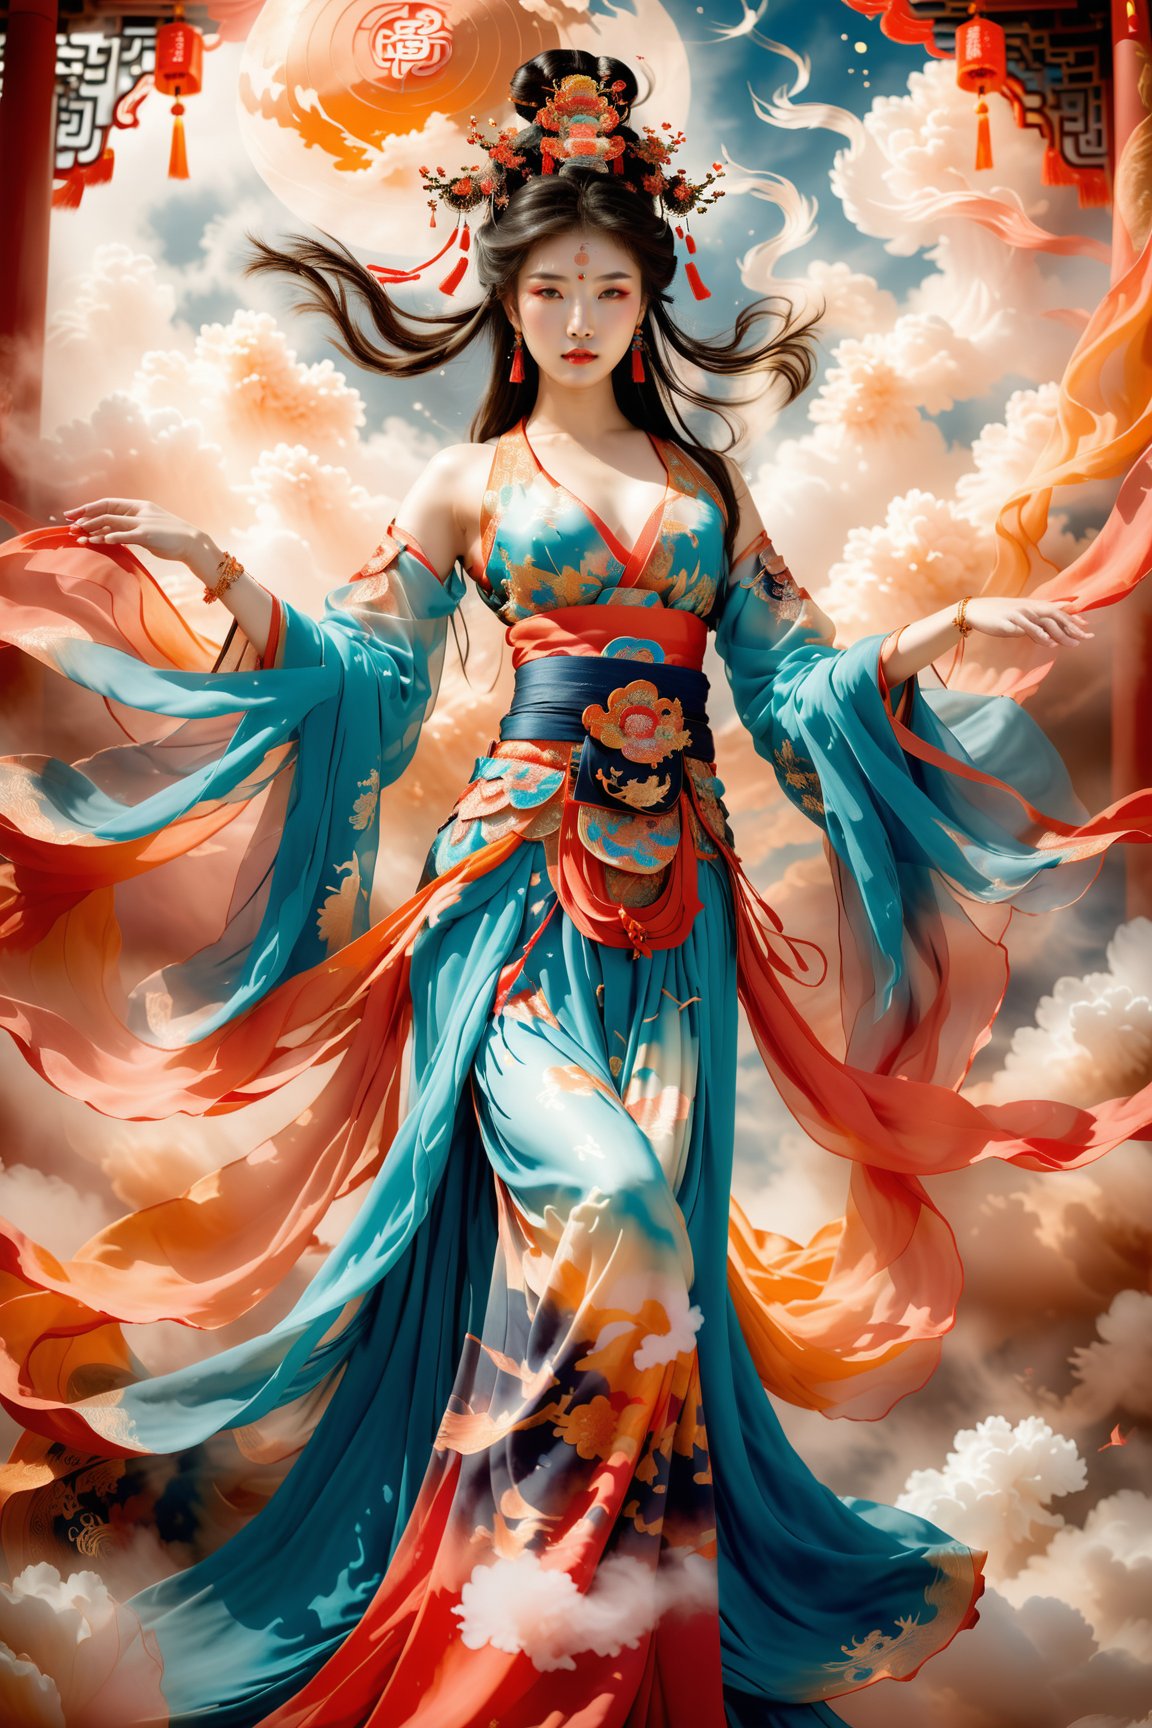 In a majestic, high-resolution digital illustration, the revered Chinese goddess stands majestically in Dunhuang, surrounded by ethereal clouds and celestial soft lighting that evokes her divine aura. Her enchanting beauty is radiated through her porcelain-like complexion, as she embodies the mythical art style of ancient China. The delicate folds of her silk robes flow effortlessly, while her eyes sparkle with an otherworldly charm. Captivating details reveal intricate patterns on her garments and accessories, transporting viewers to a realm of Chinese mythology where revered deities like herself reign supreme in divine splendor.